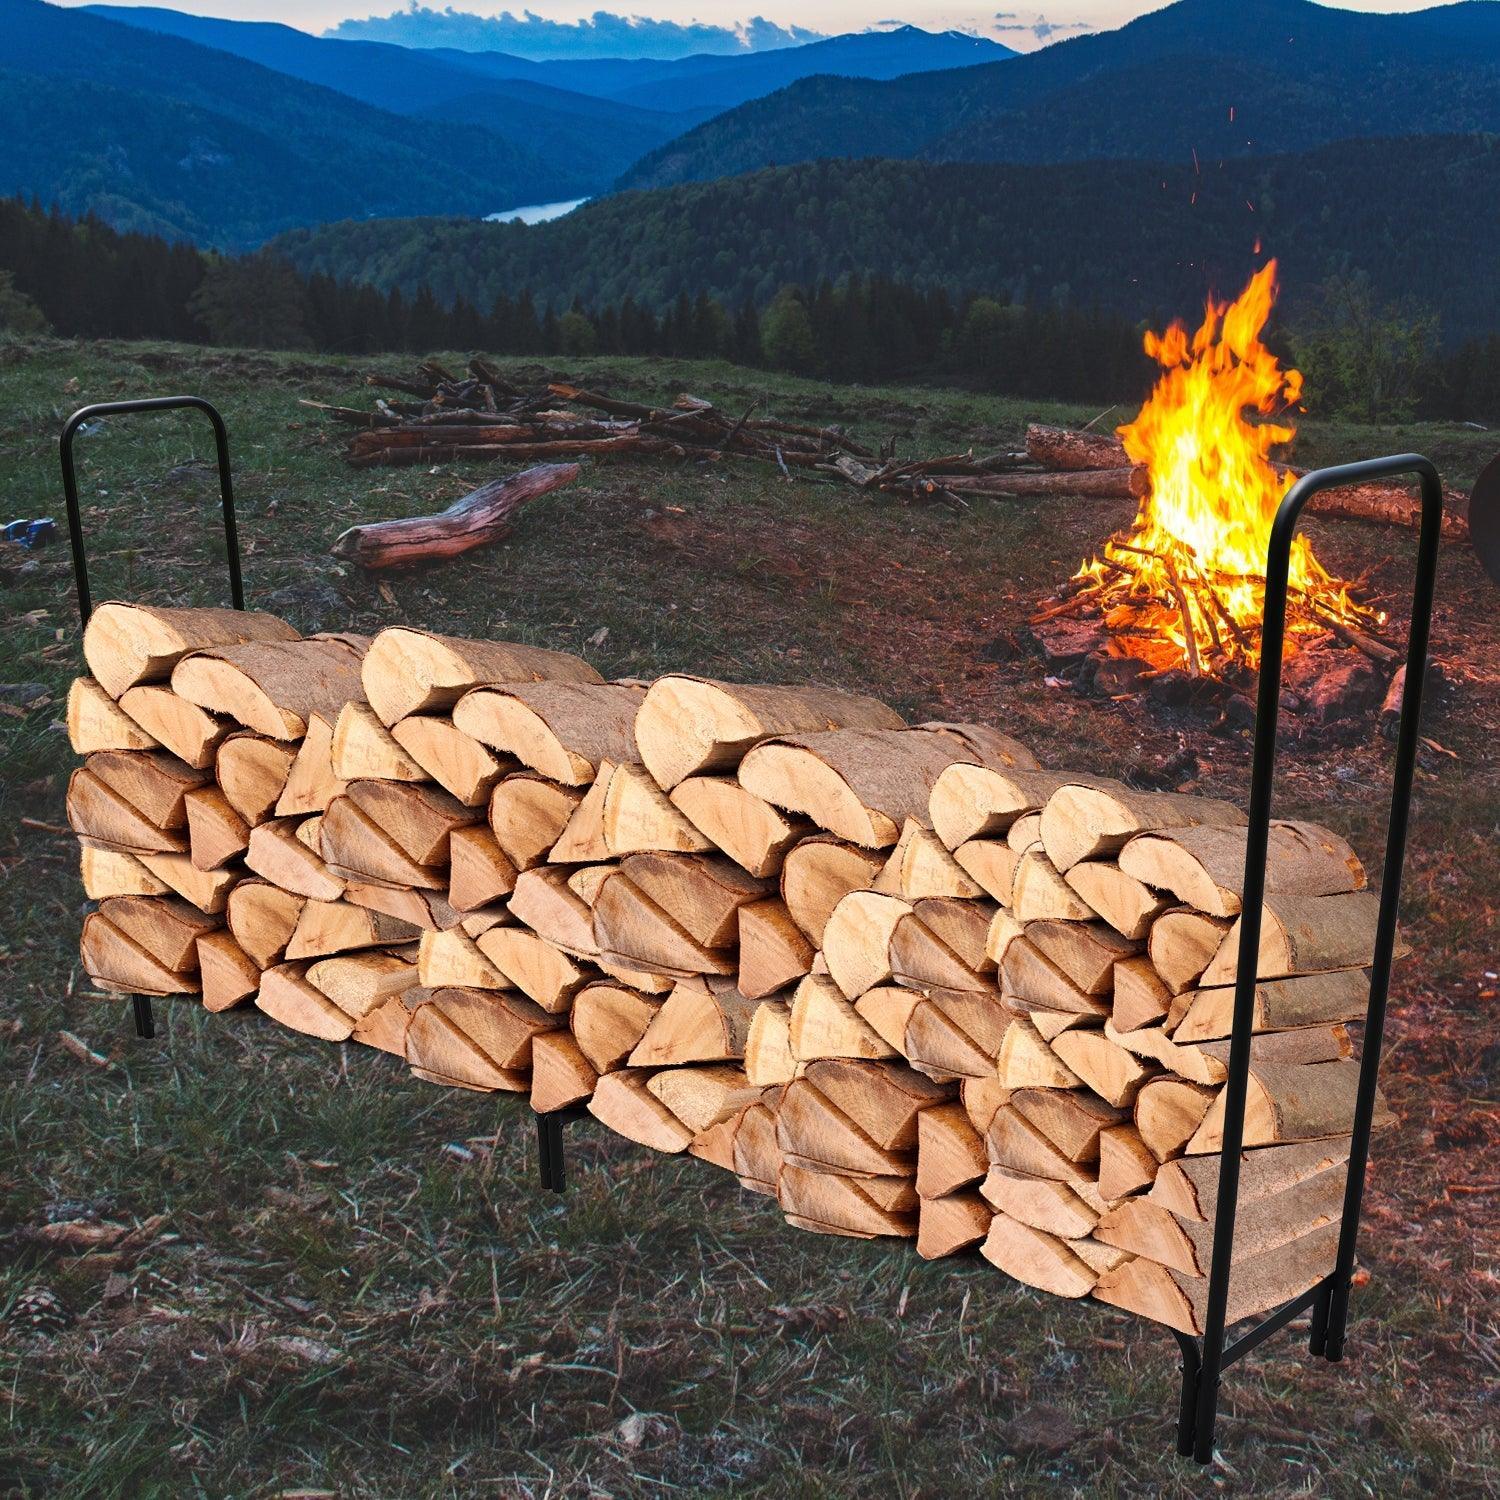 8ft Firewood Rack Heavy Duty Log Rack Indoor Outdoor Wood Rack for Firewood Metal Wood Stacker USPG-FWR001-BC-8FT FredCo